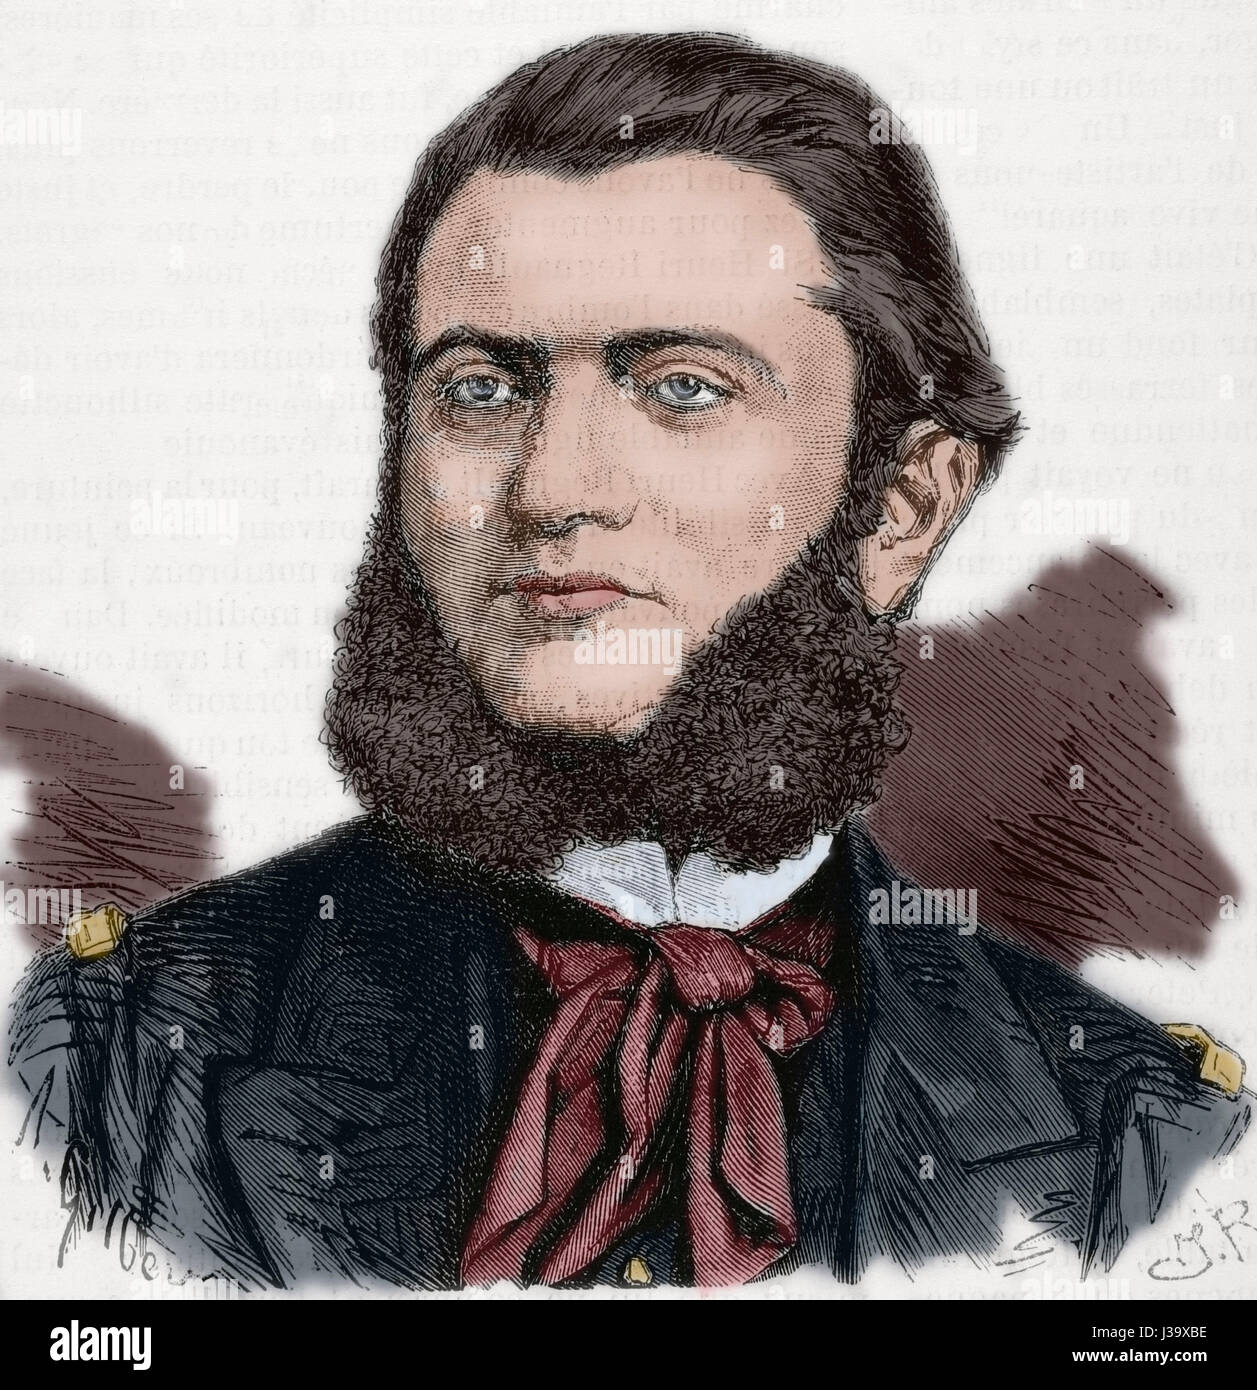 Marcel Foillard (1838-1871). French military. Portrait. Engraving by A. Gilber. 'L'Illustration, Journal Universel', 1871. Colored. Stock Photo